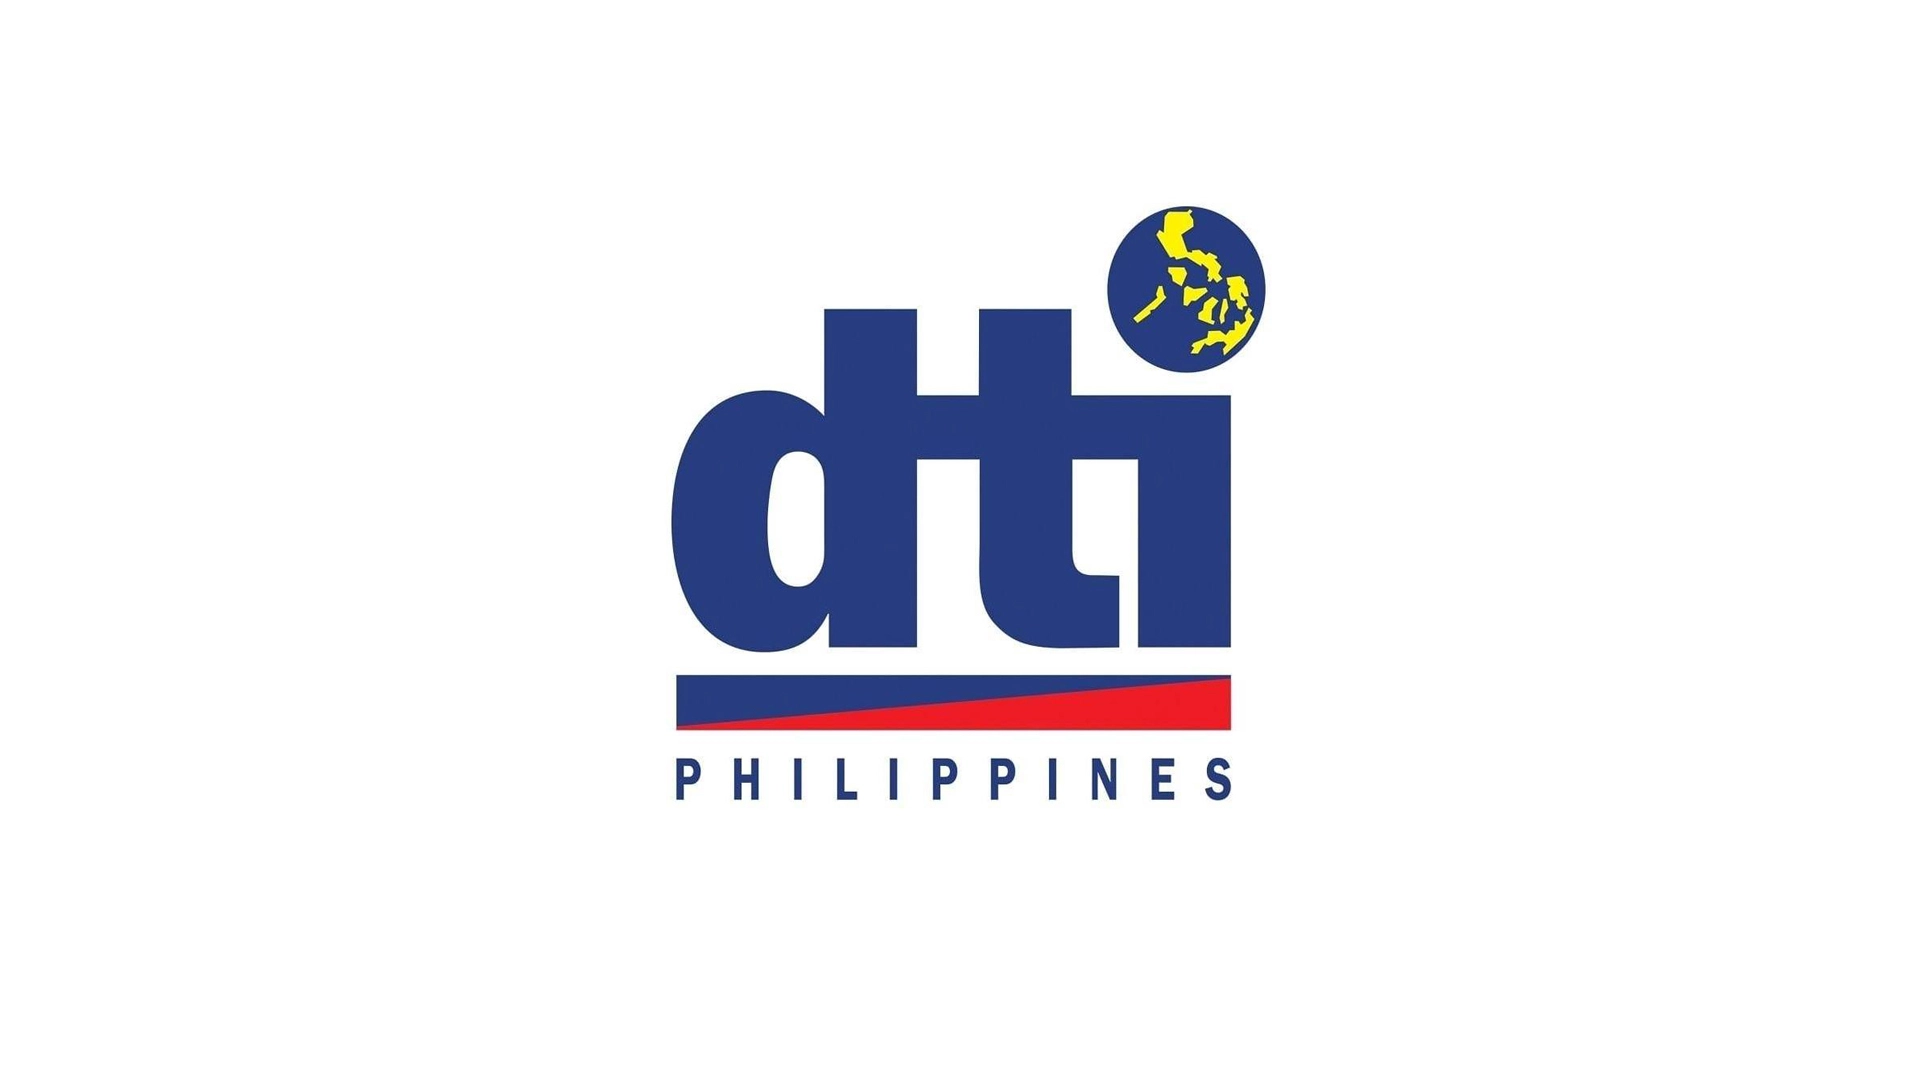  DTI COLLABORATES WITH AMAZON WEB SERVICES TO BOOST THE DIGITAL CAPACITIES OF PHILIPPINE INDUSTRIES